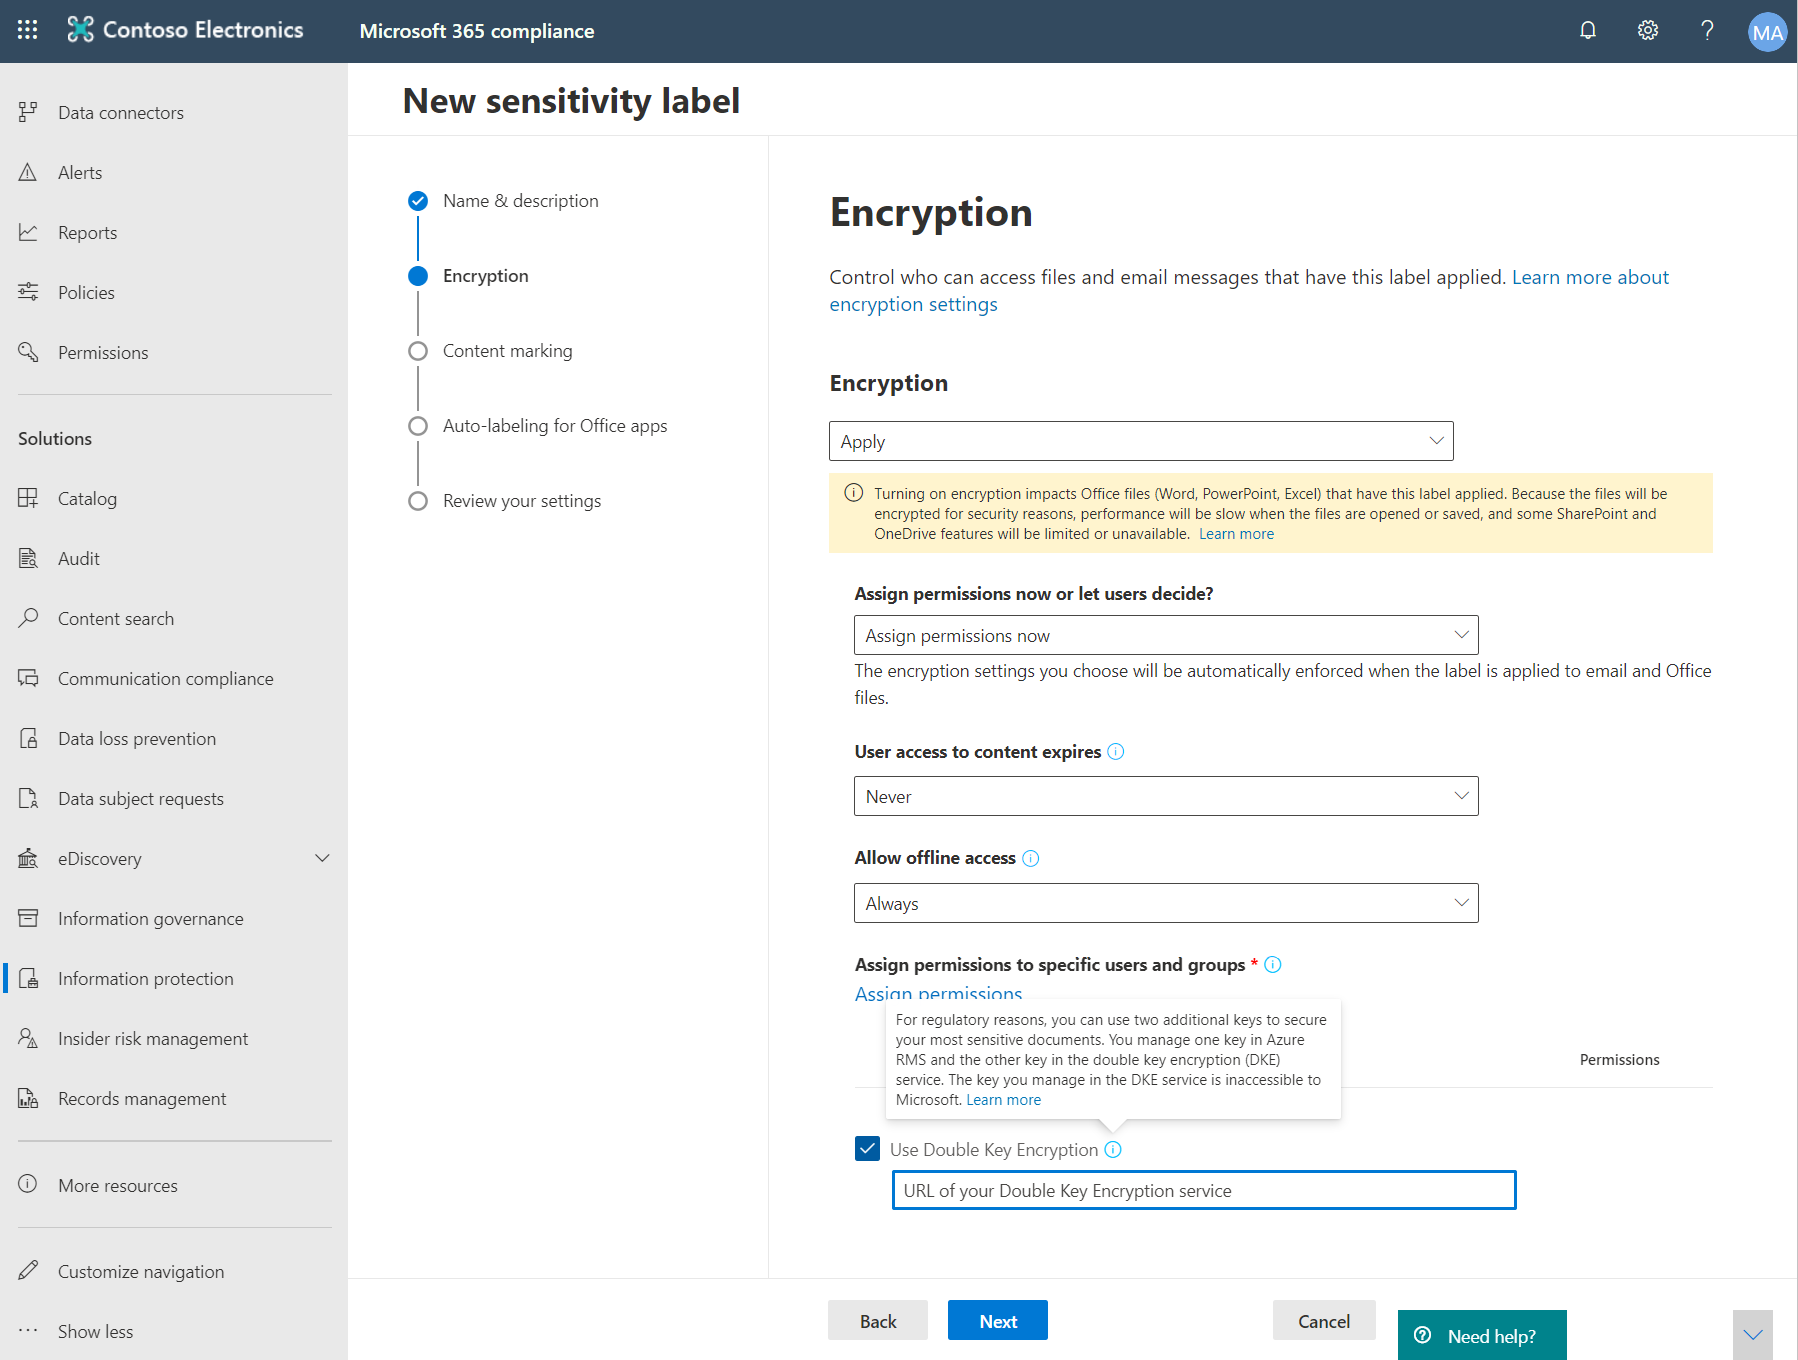 Select Use Double Key Encryption in the Microsoft Purview compliance portal.